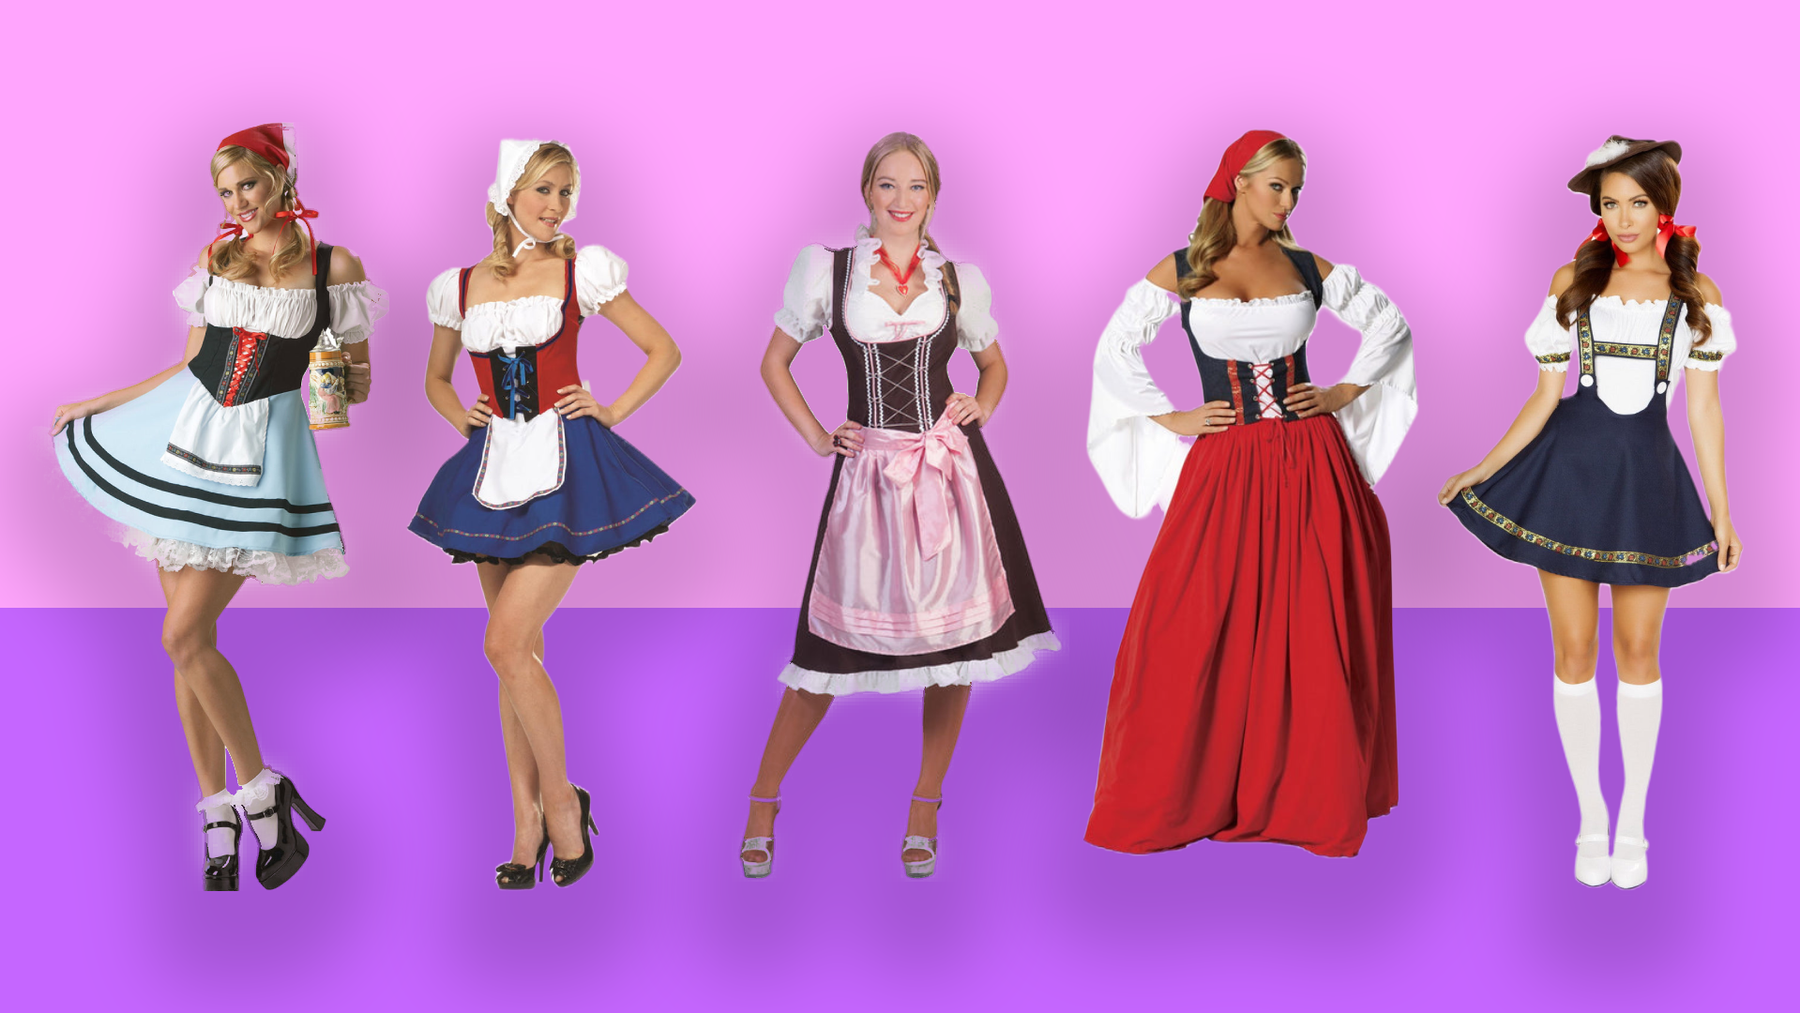 Get Ready to Slay Oktoberfest: Our Top 5 Show-Stopping Women's Oktoberfest Costumes